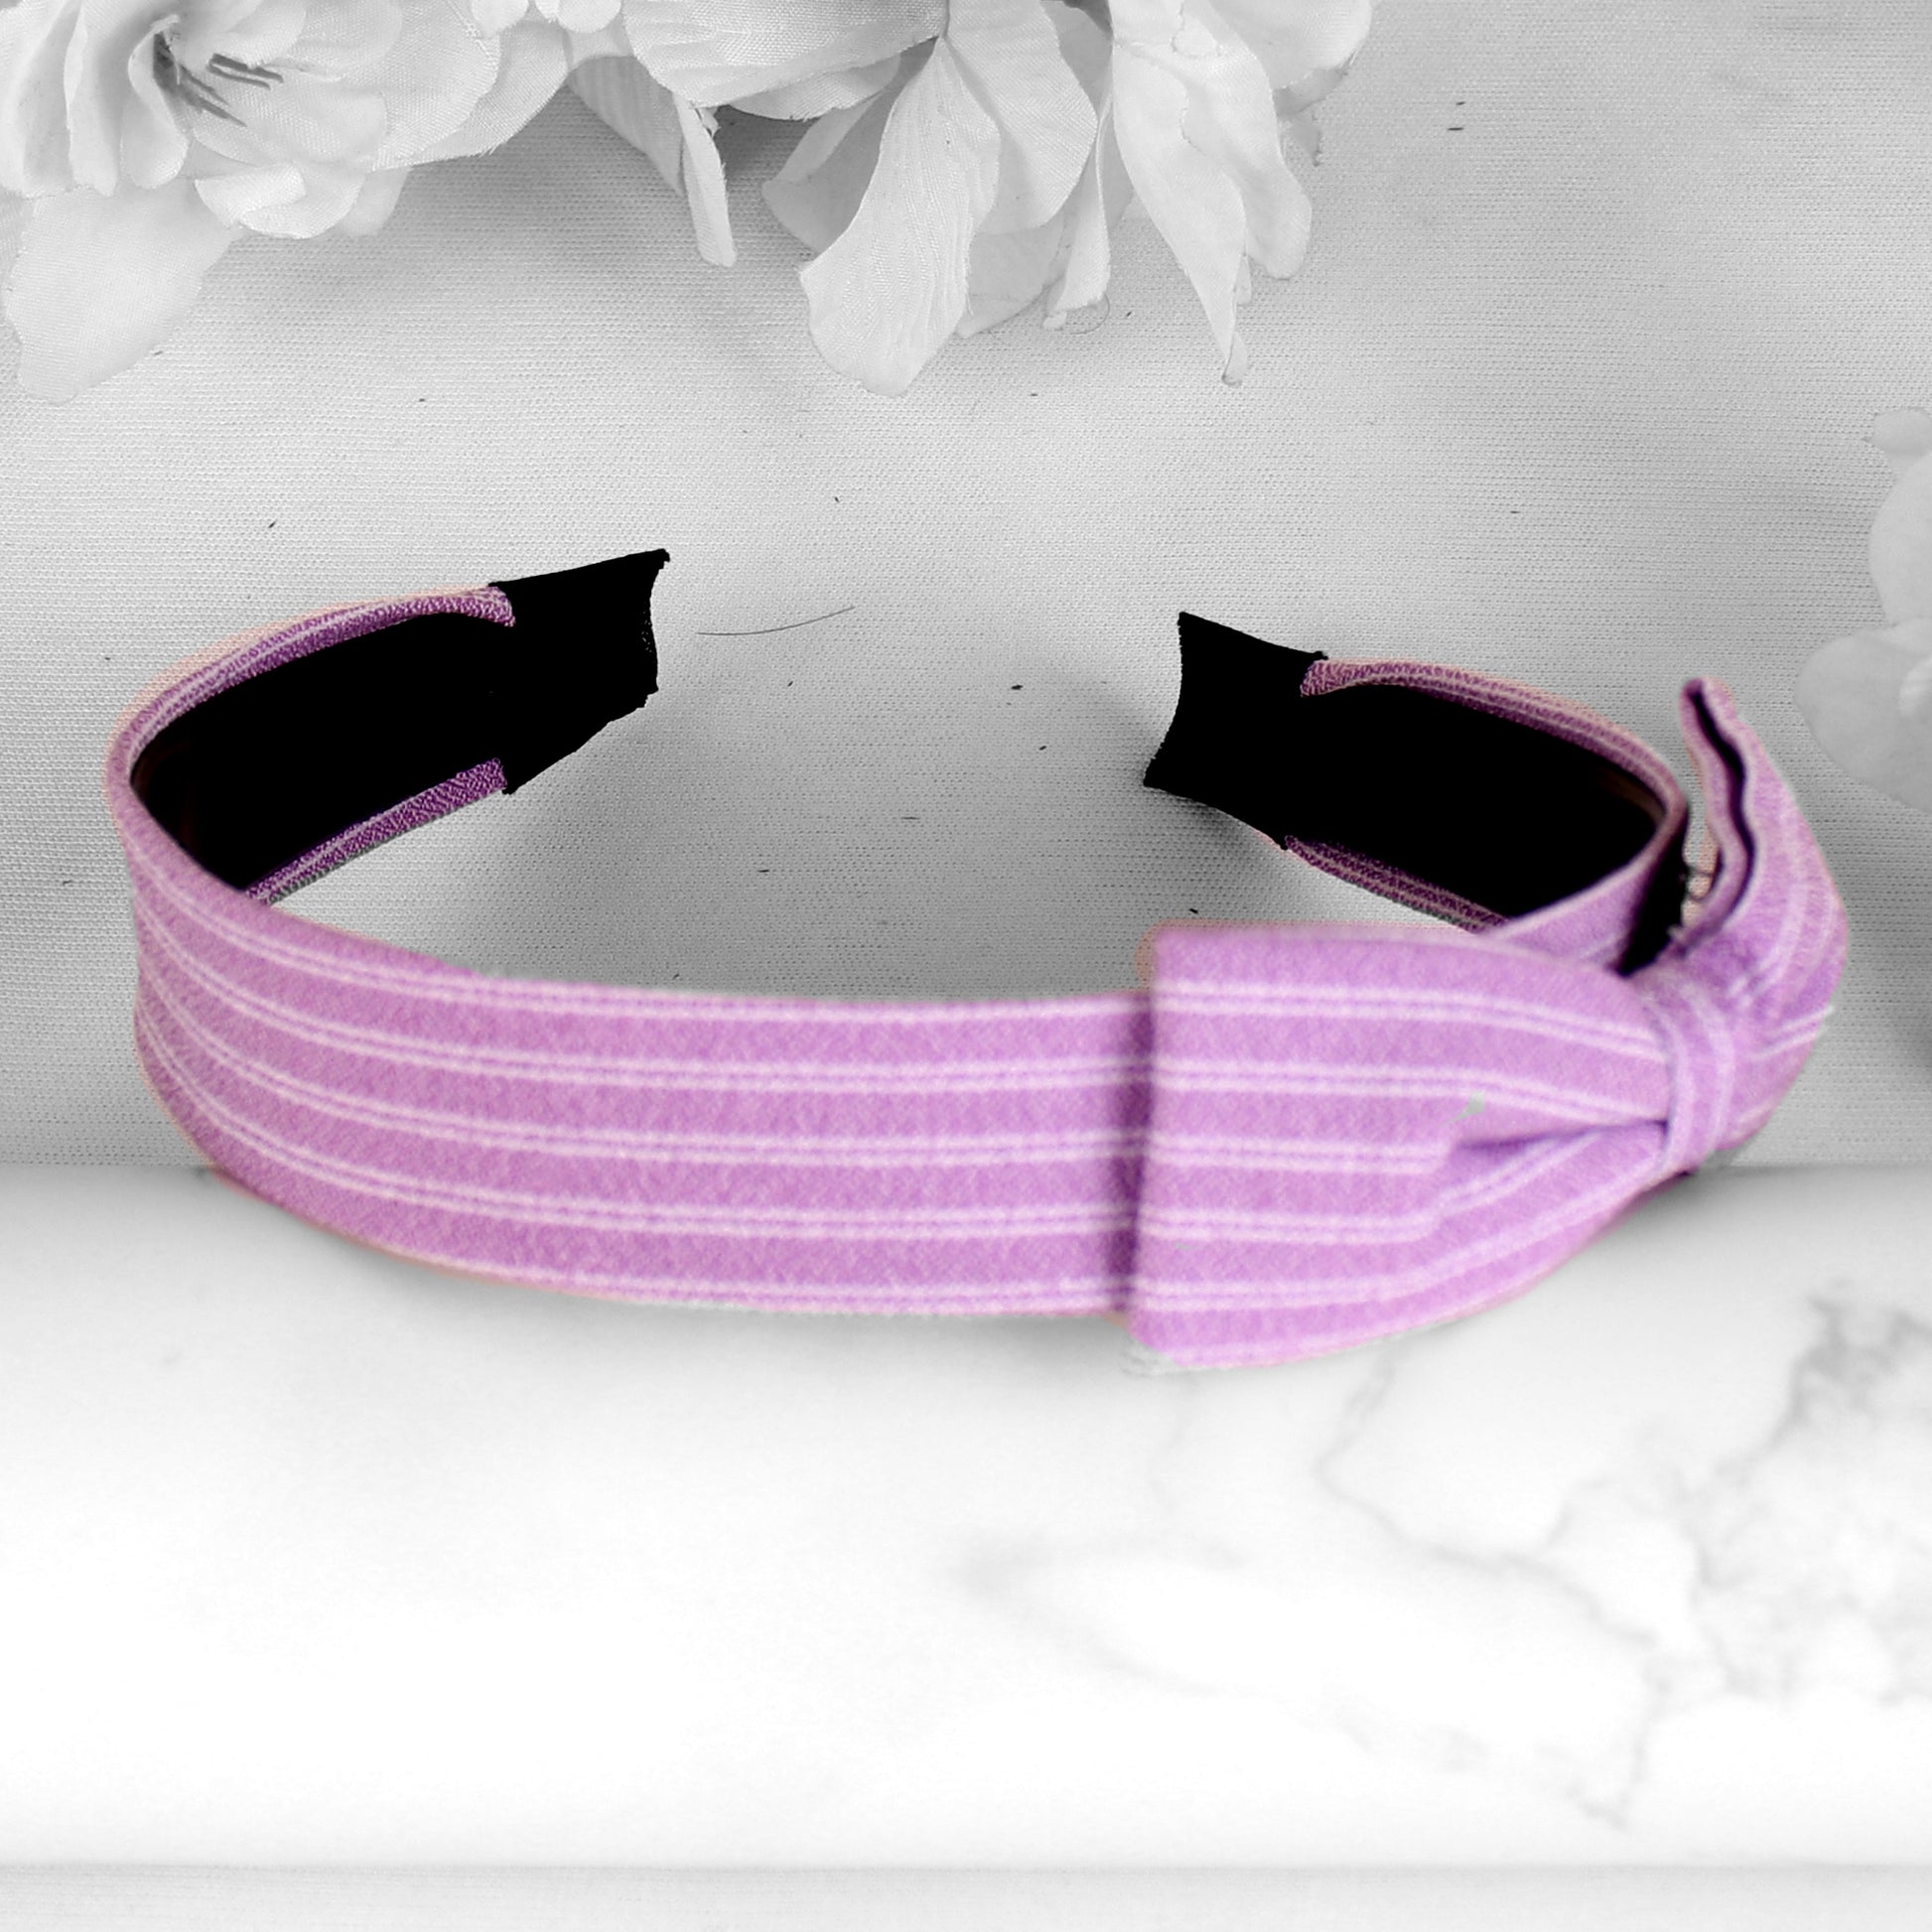 HairBand,Bewitching Bow Hair Band in Mauve - Cippele Multi Store